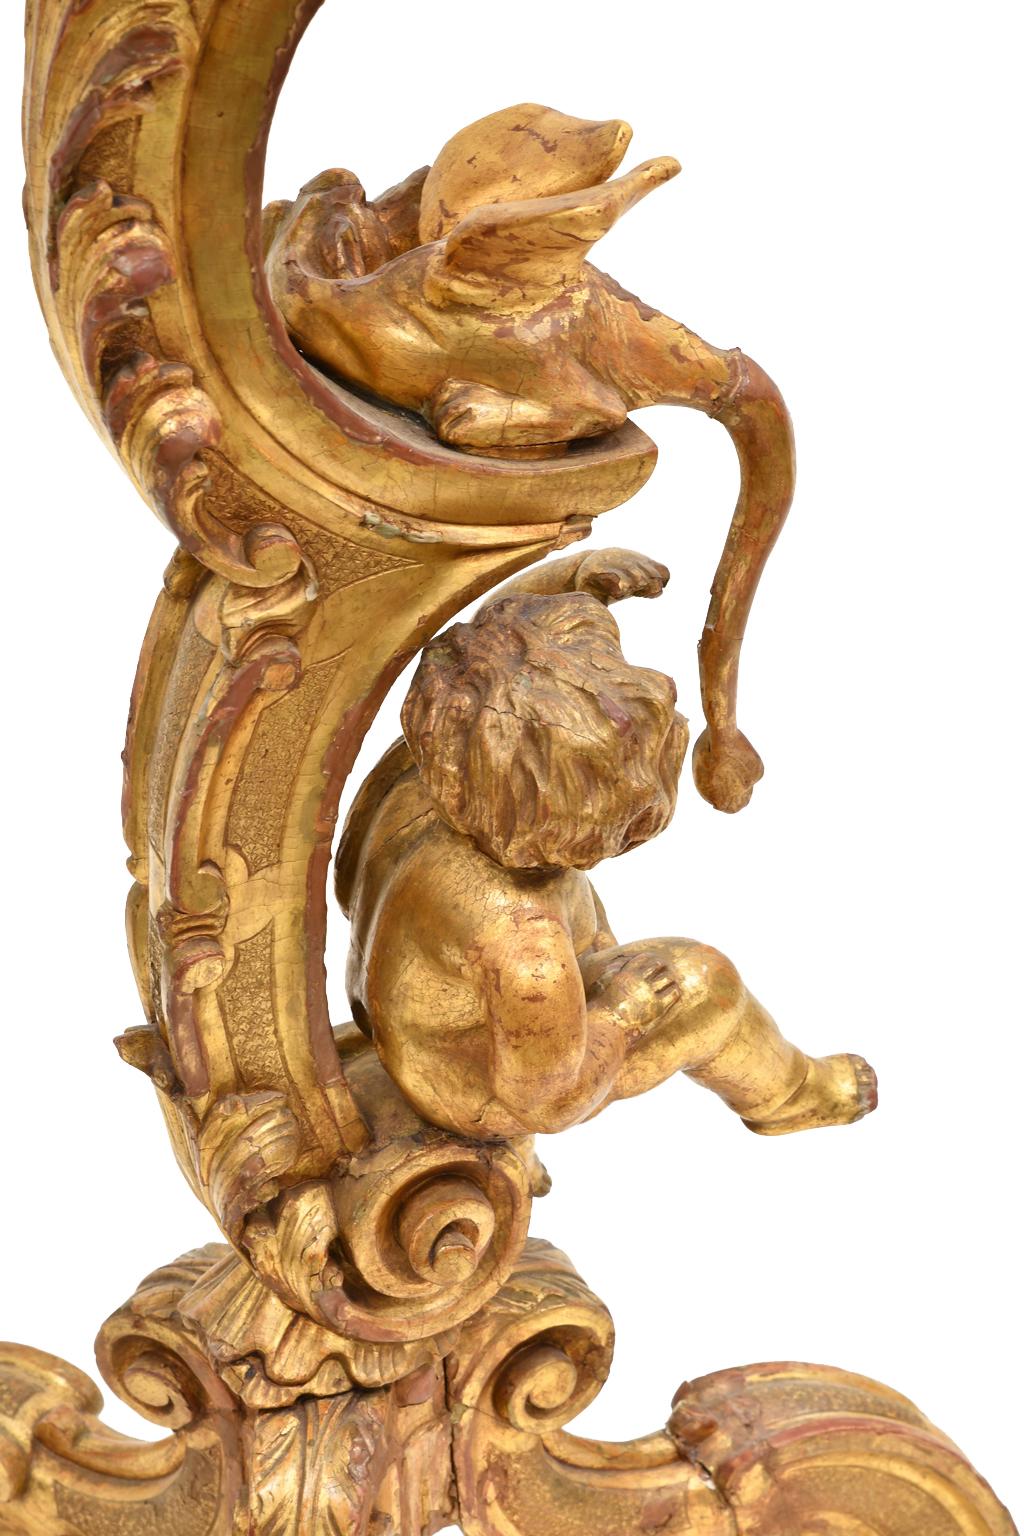 19th Century Antique Venetian Trespolo Pedestal Stand in Gilded Wood w/ Carved Dragon & Putto